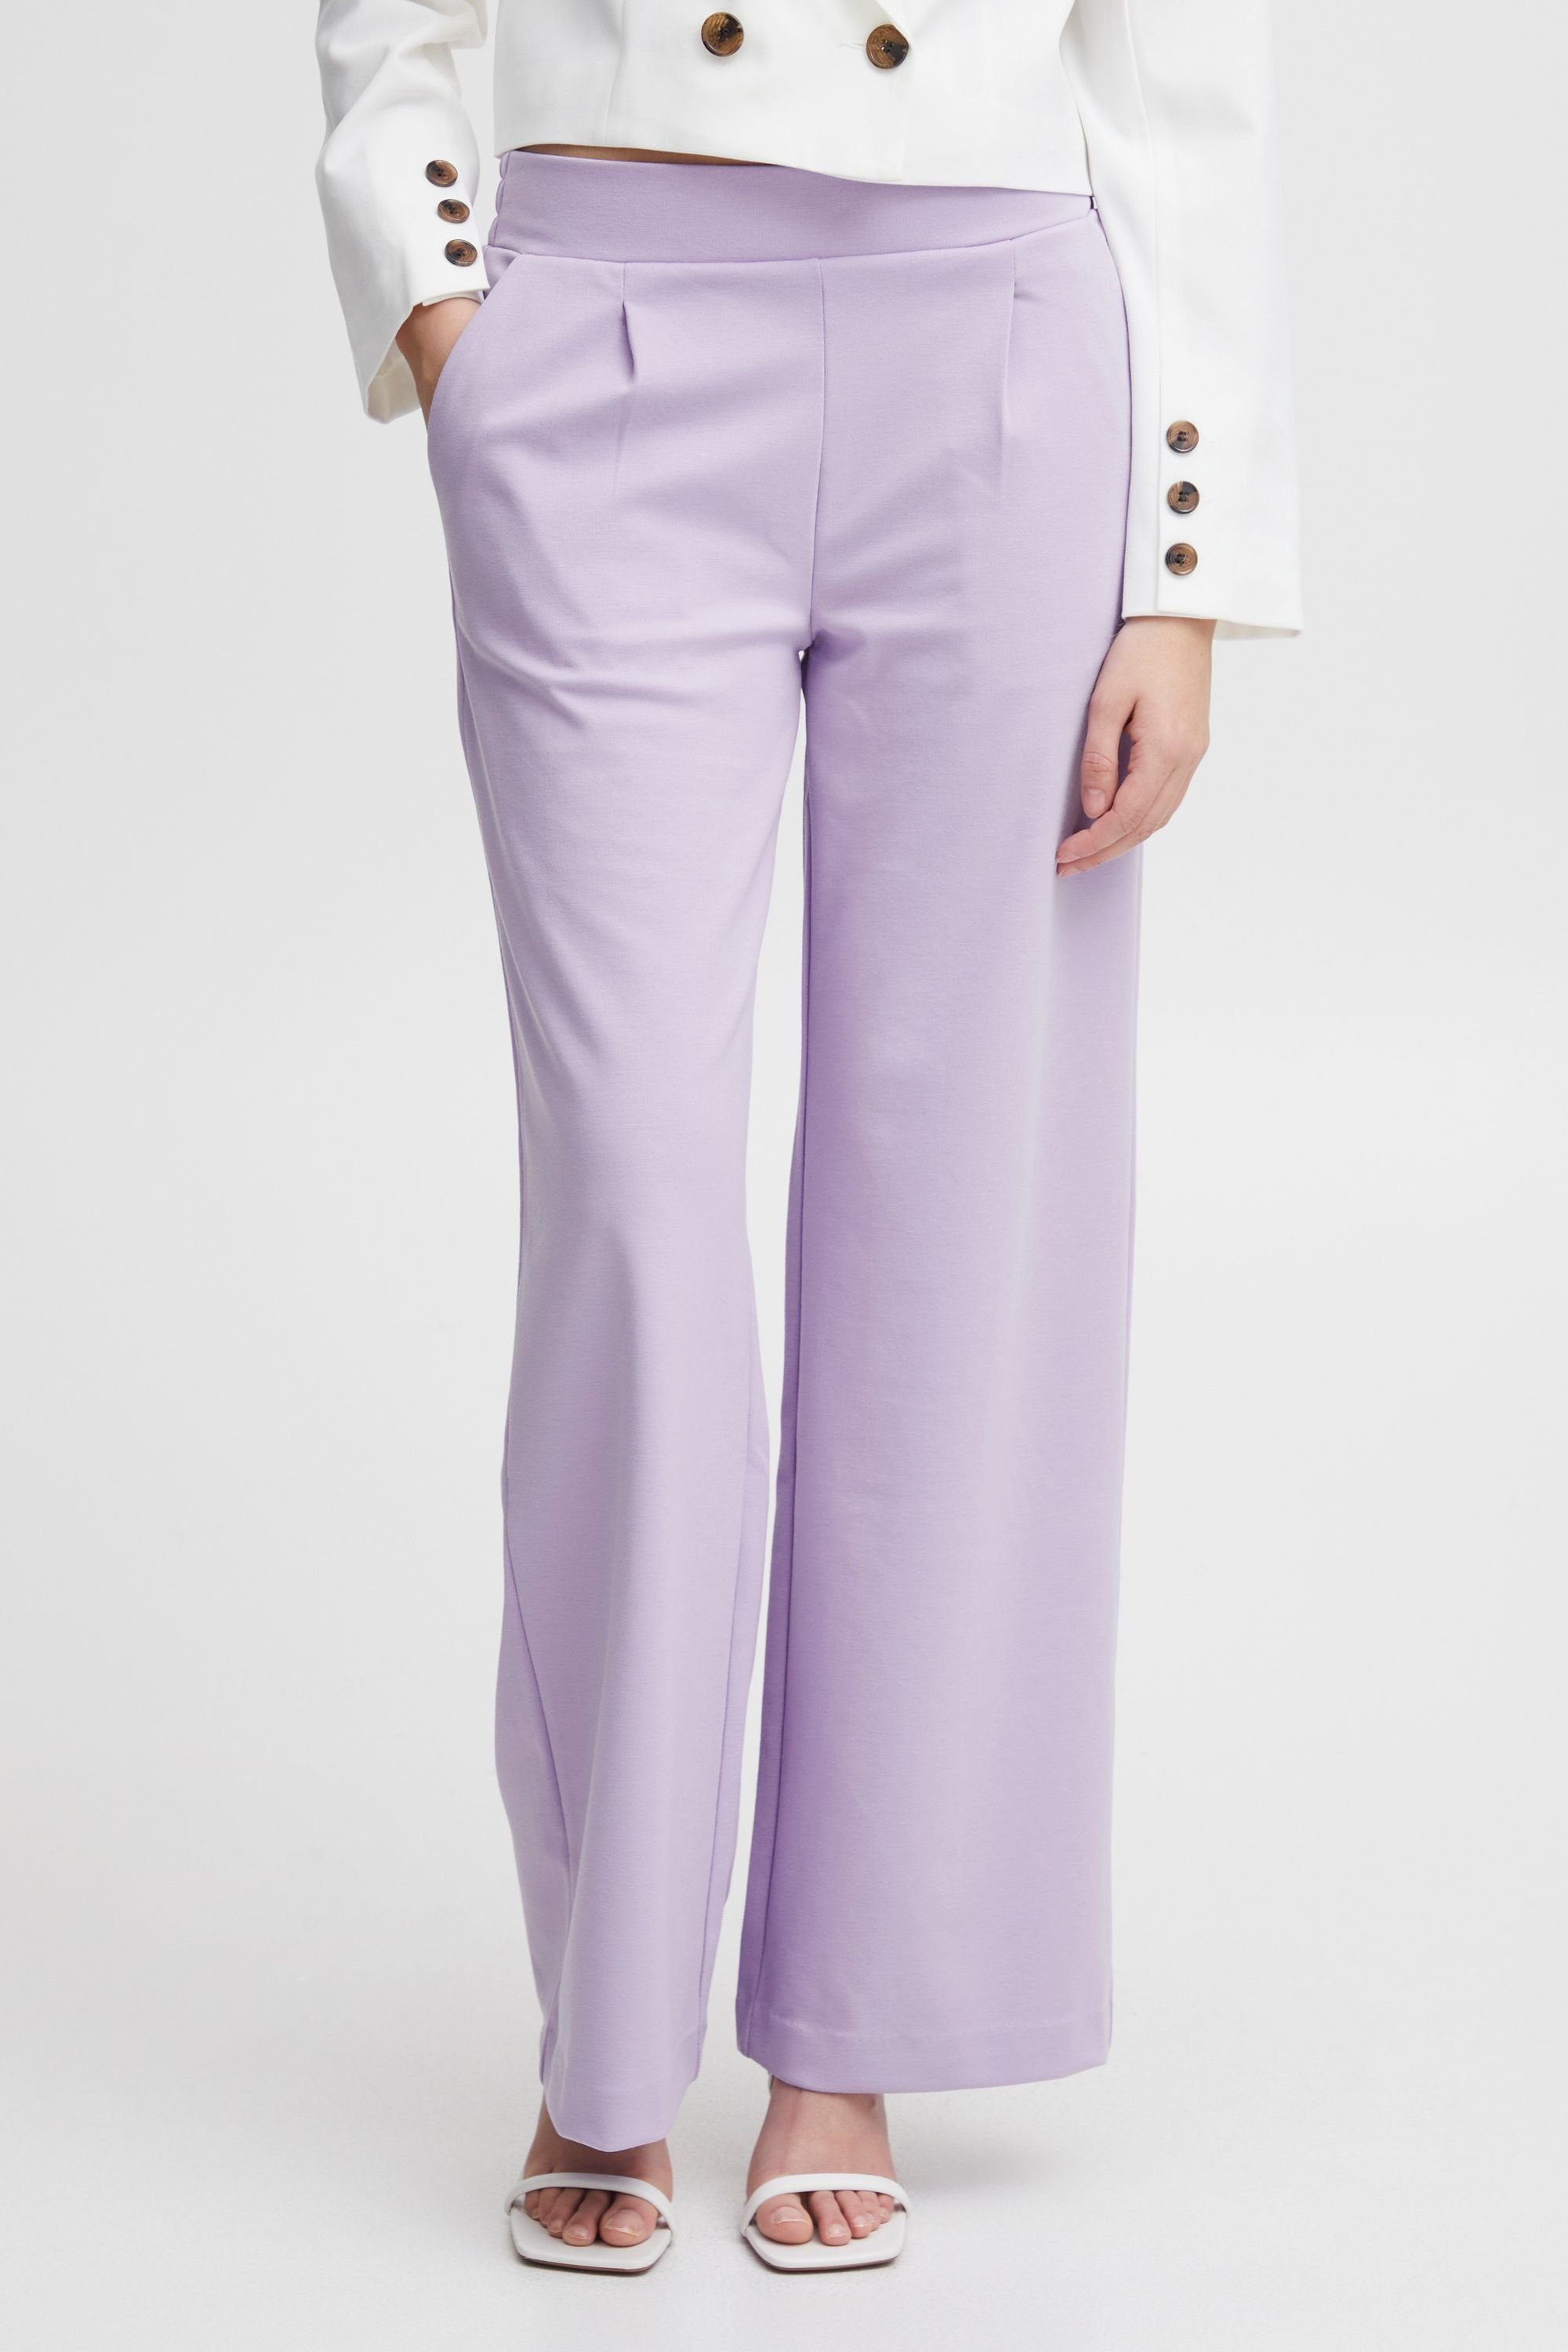 (153716) WIDE BYRIZETTA Rose Purple b.young - 2 2 PANTS 20812847 Stoffhose